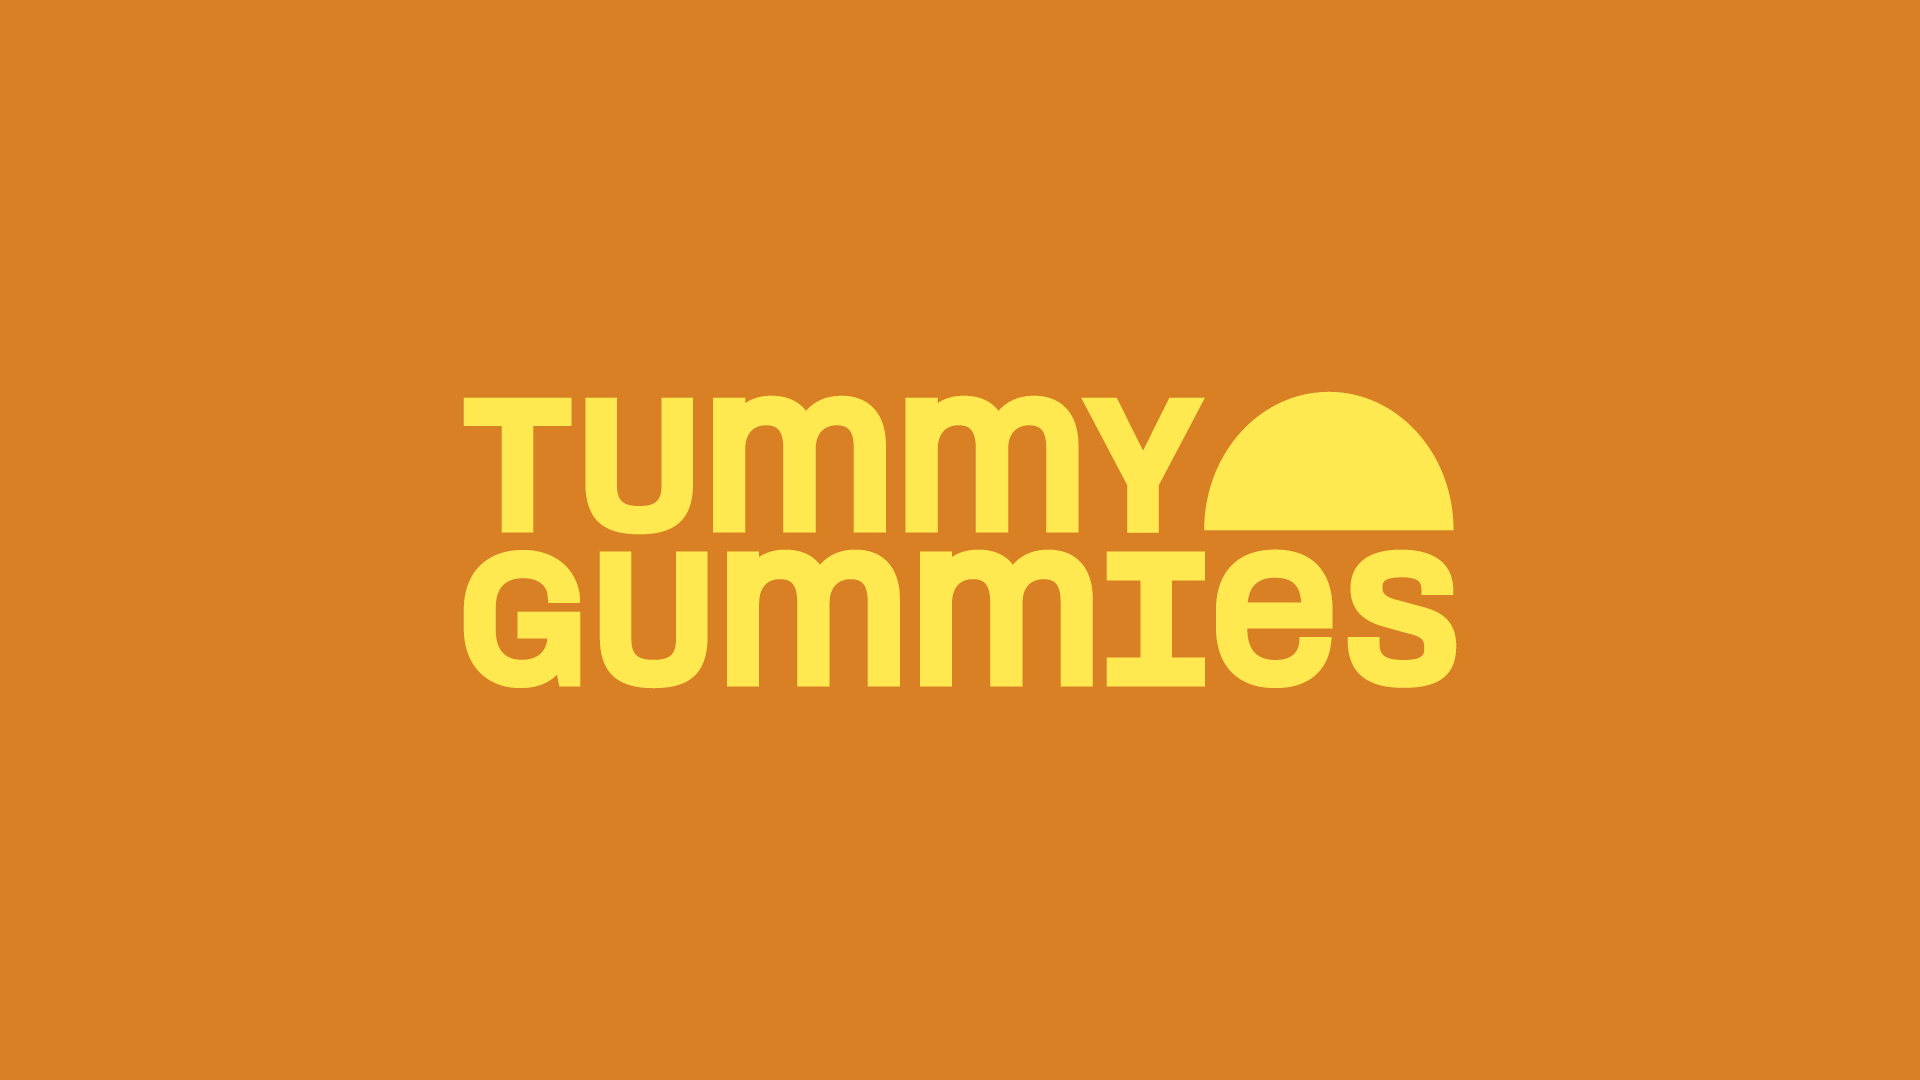 Tummy Gummies New Packaging by the Offices Makes a Hero of Luminous Fruit Gummies